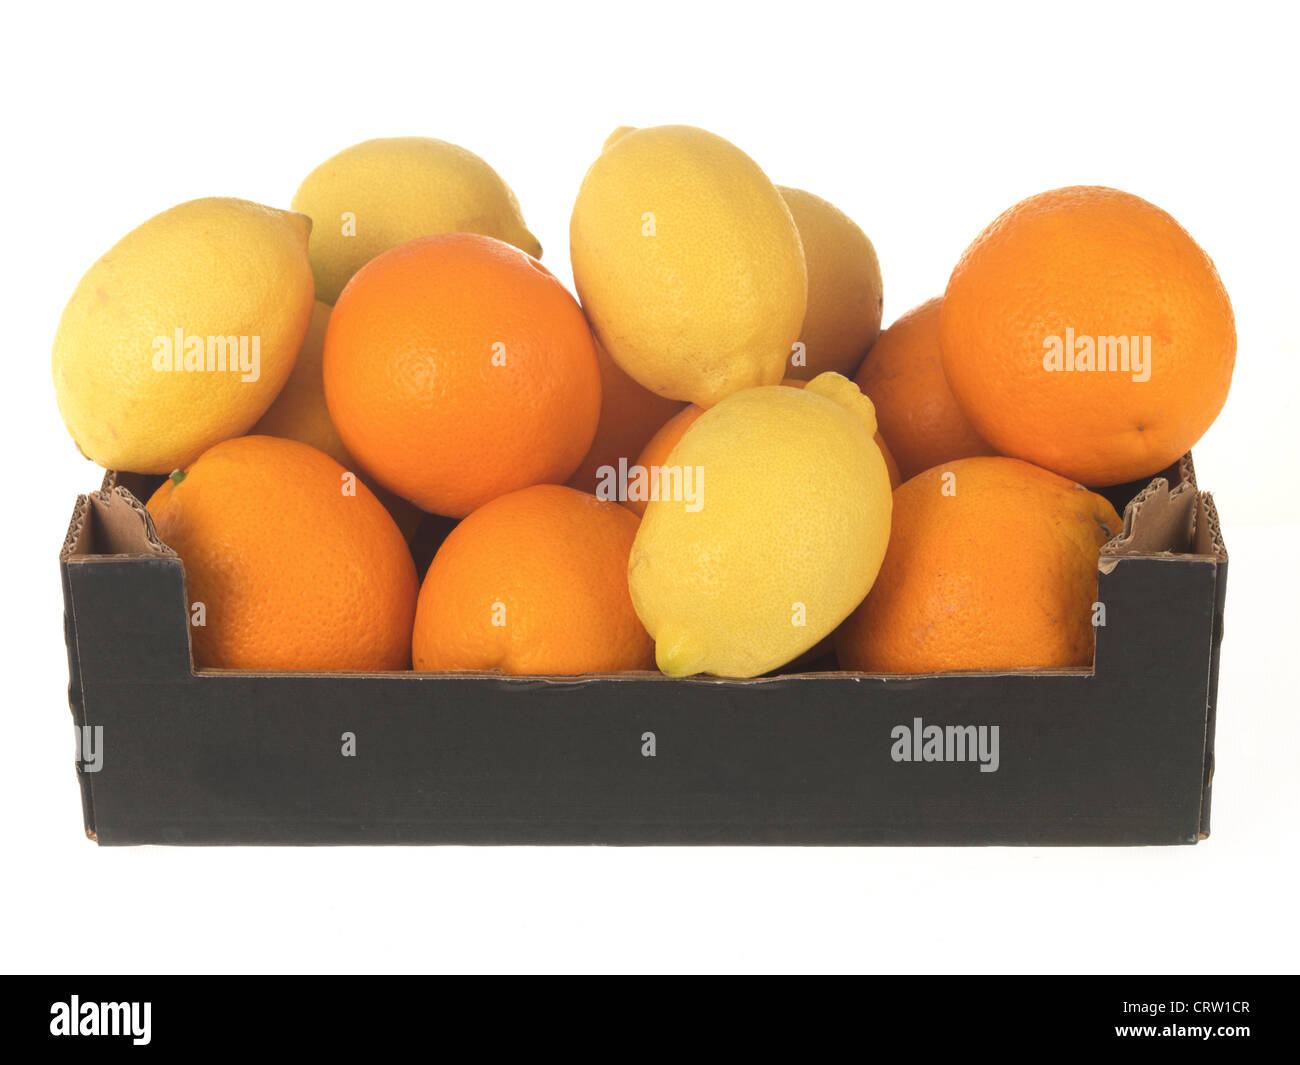 Fresh Ripe Whole Tropical Oranges And Lemons Citrus Fruit, Isolated Against A White Background, With No People Stock Photo